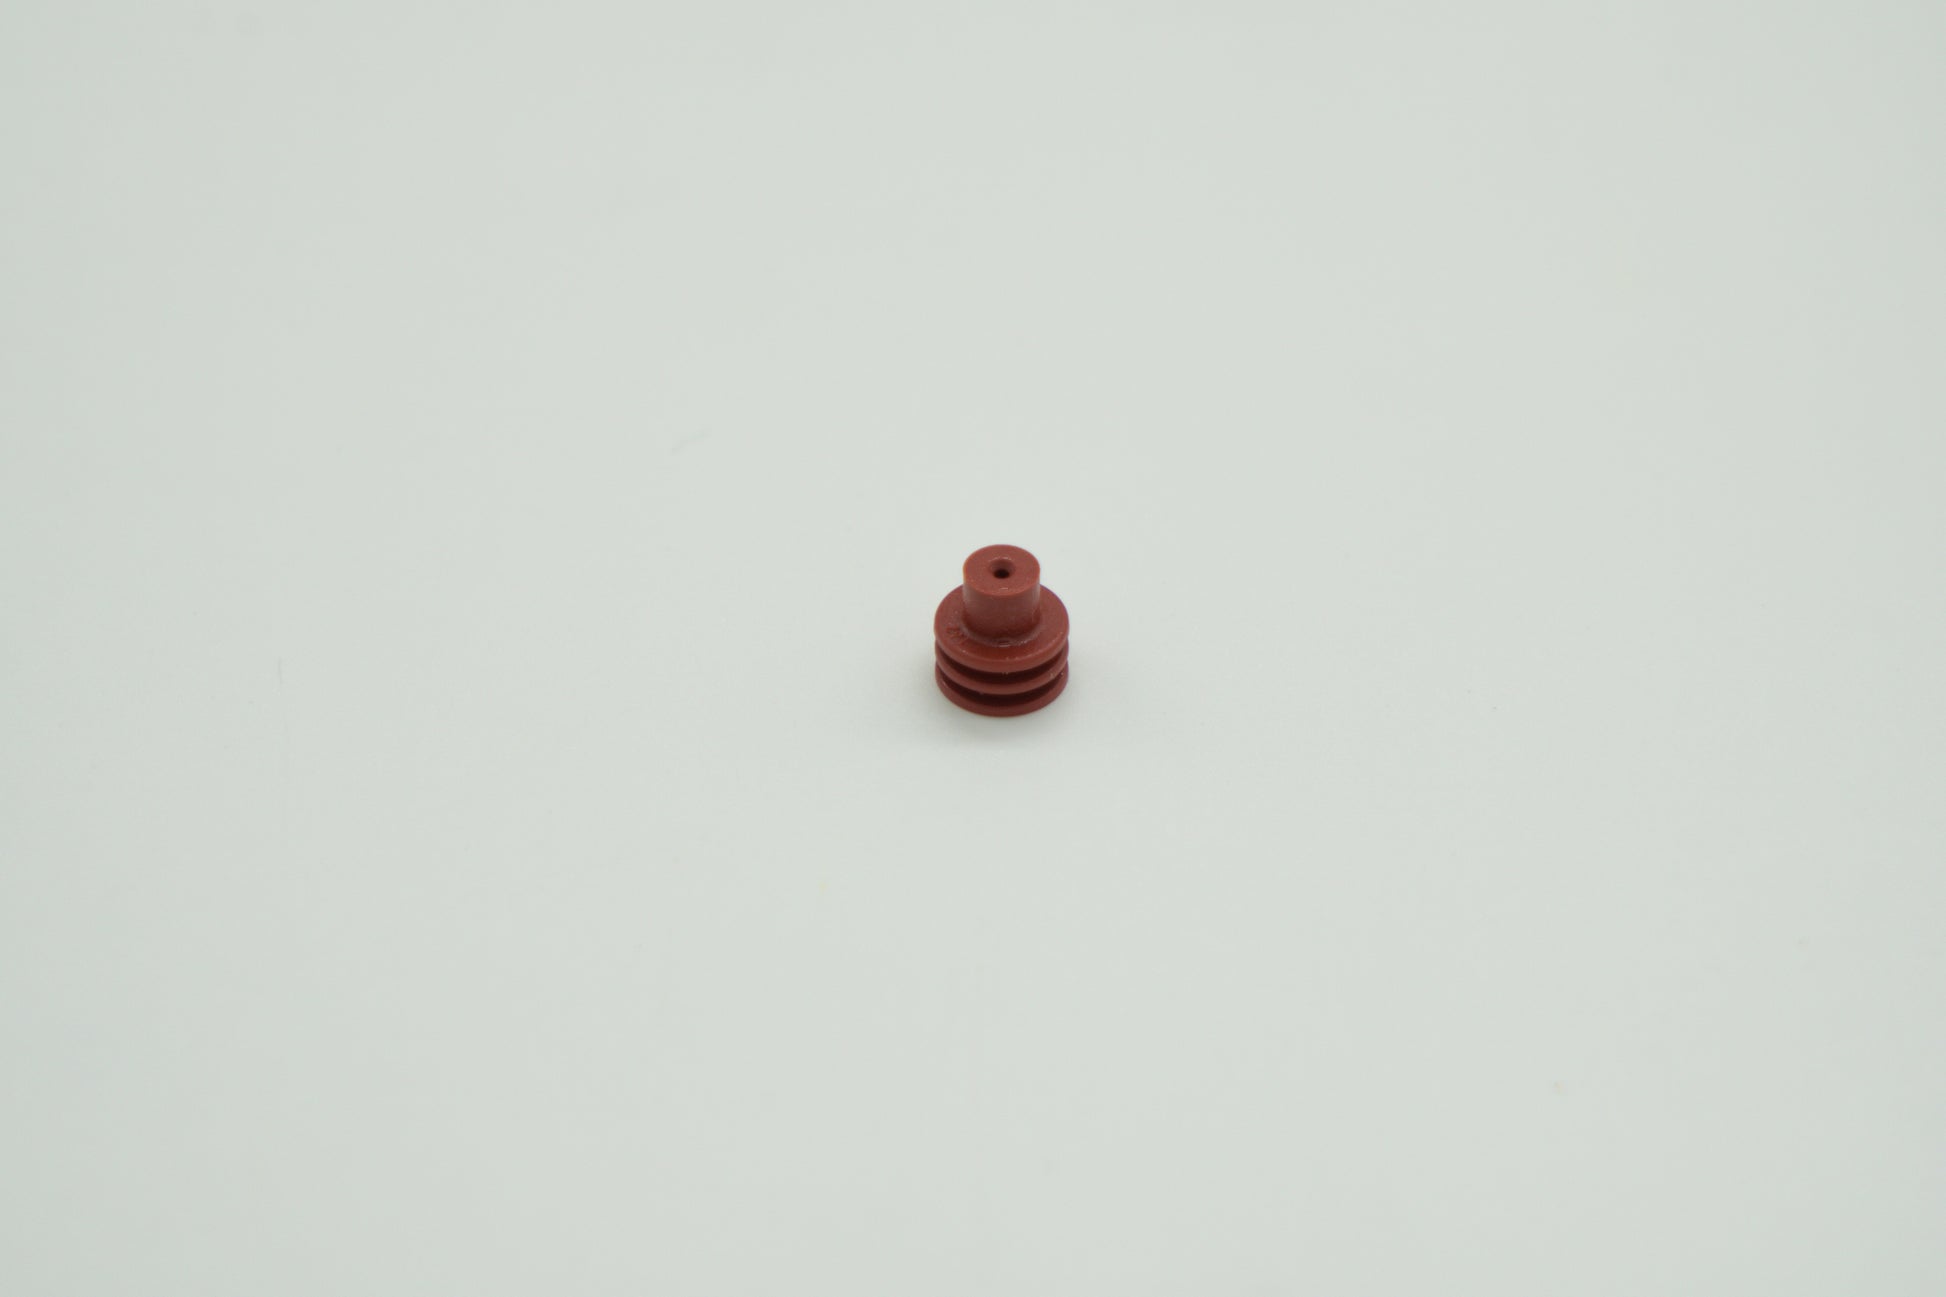 Bussmann Fuse Box Cavity Seal Extra Small 15324983 Red Maroon